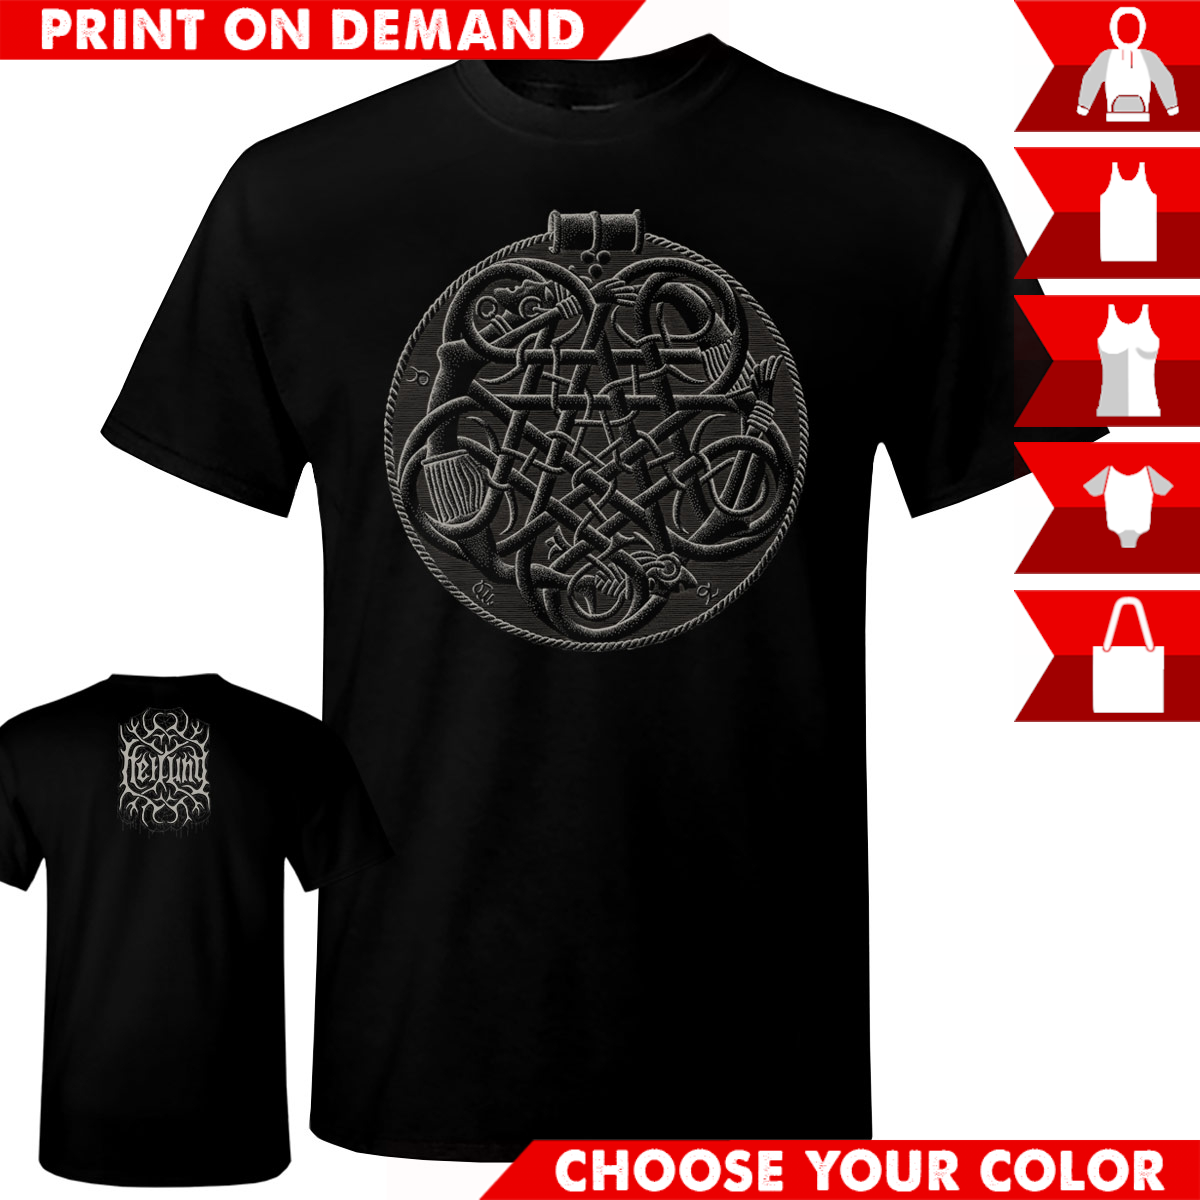 Heilung - Ace Of Coins - Print on demand